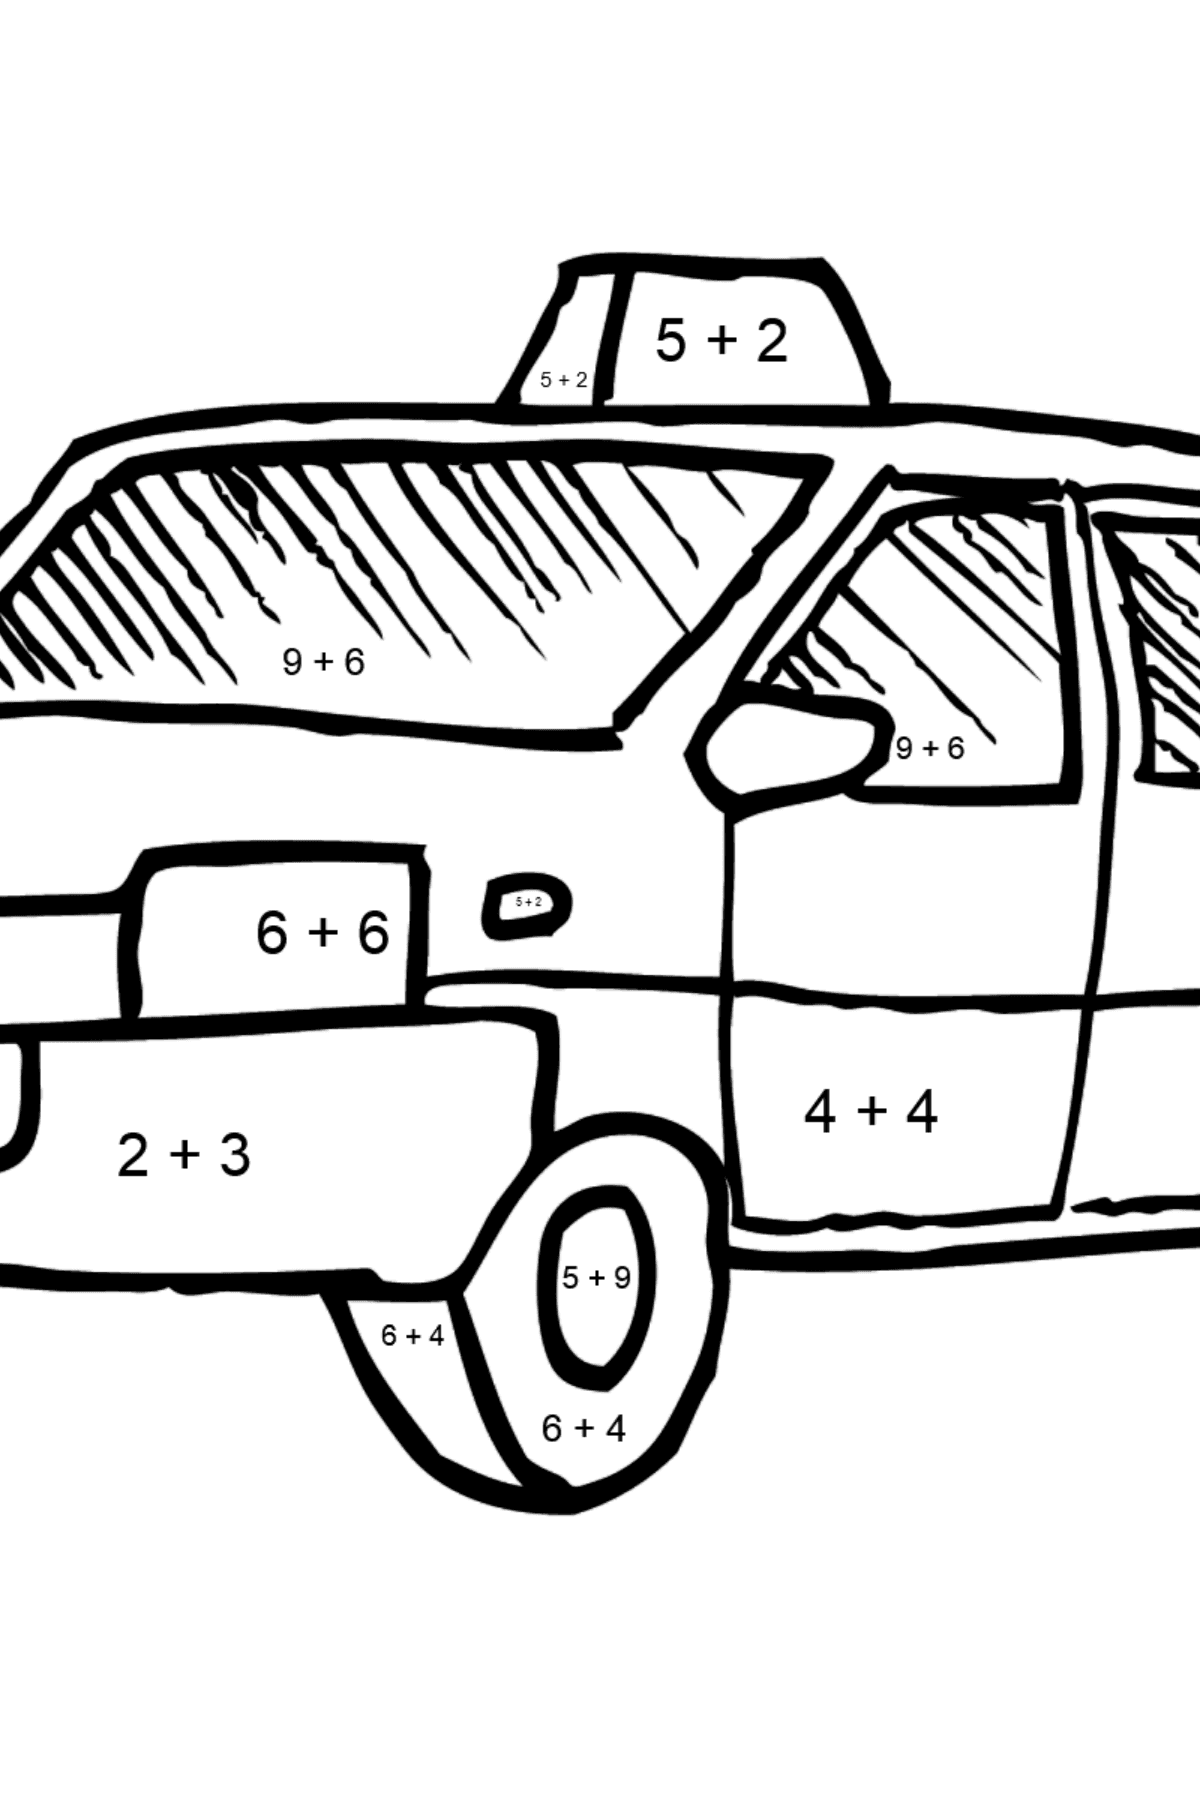 Coloring Page - A Yellow Taxi - Math Coloring - Addition for Kids